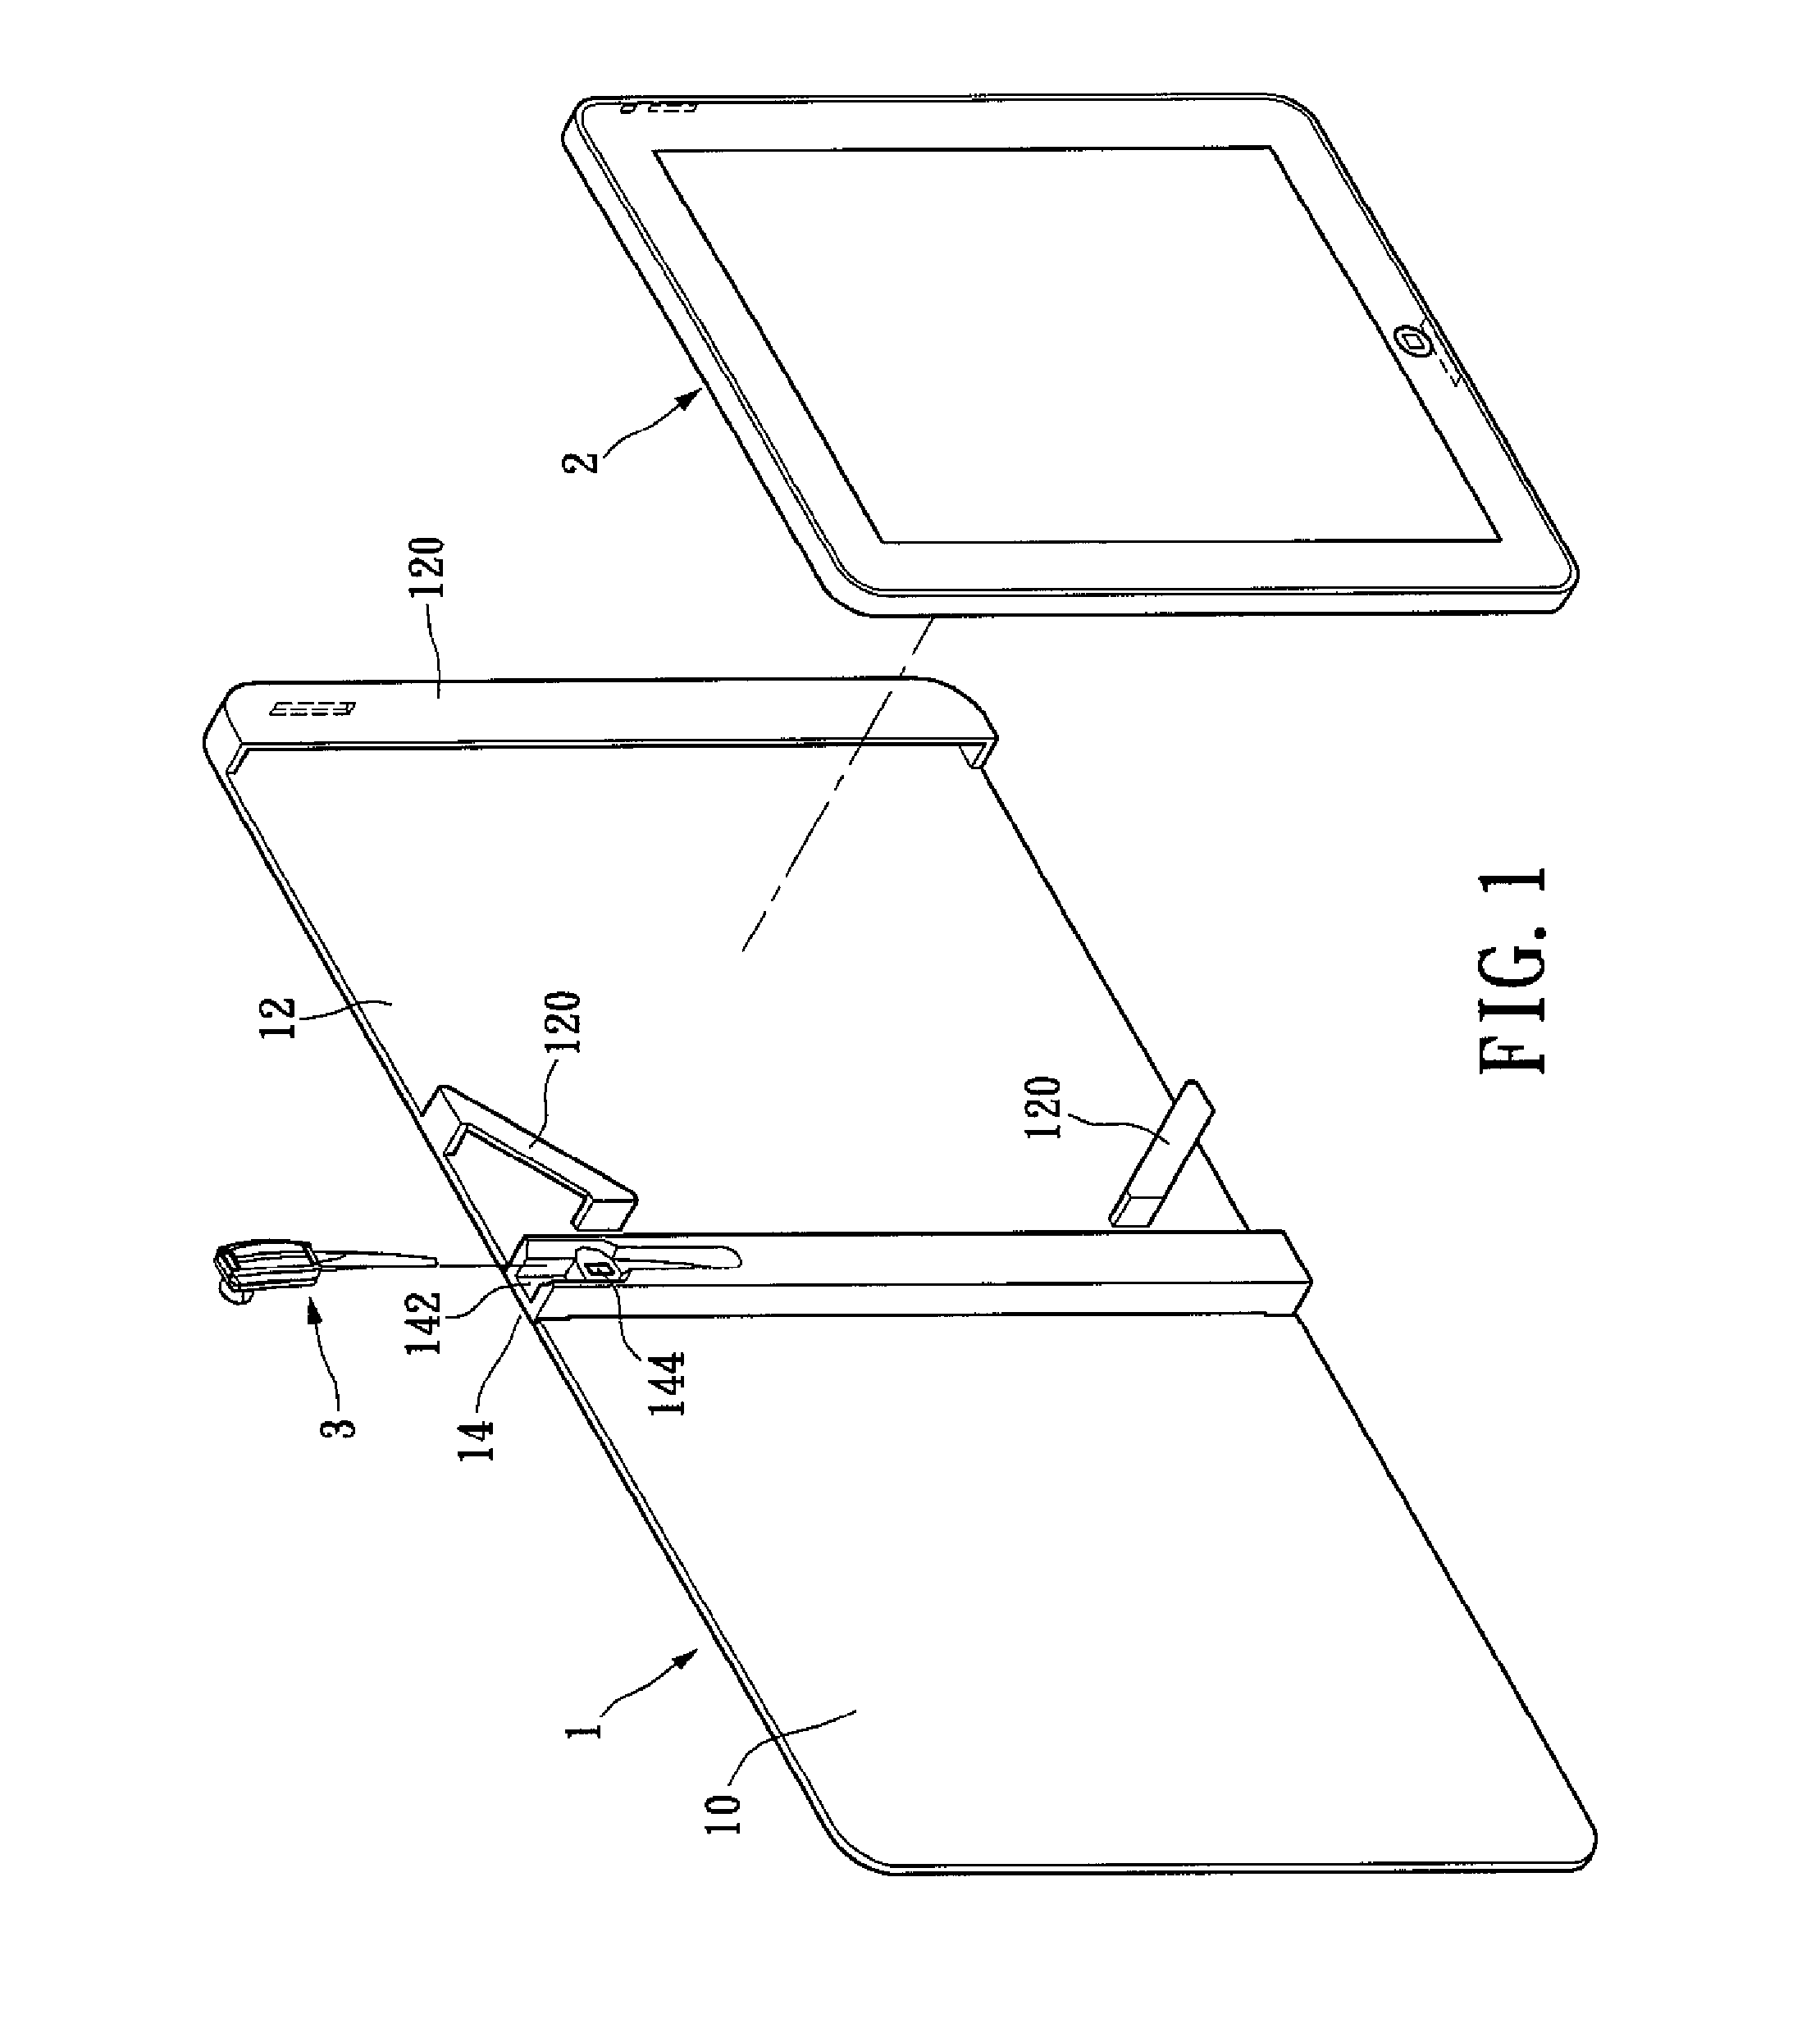 Foldable case for storing multimedia device